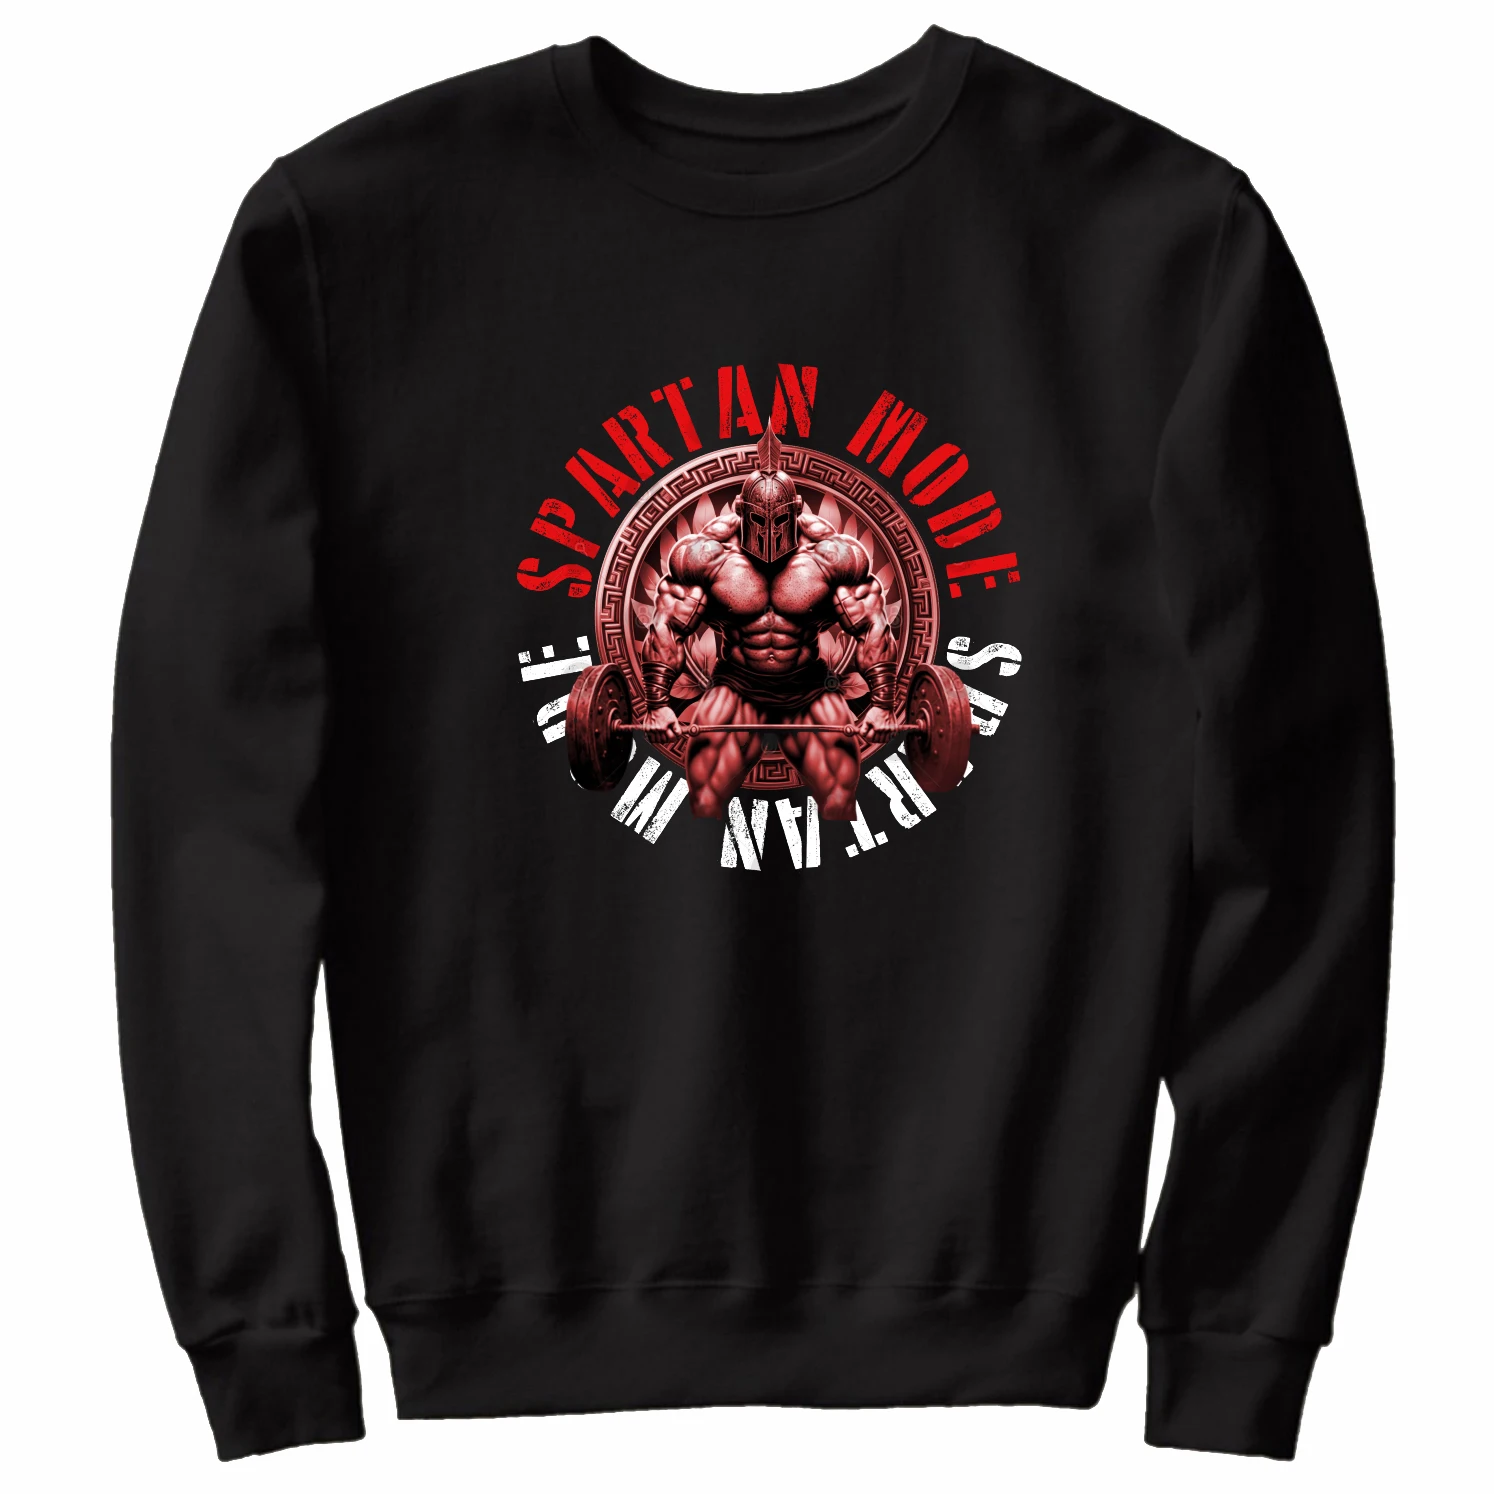 

Spartan Mode Warrior Gym Bodybuilding Fitness Muscles Training Sweatshirts New 100% Cotton Casual Mens Clothing Streetwear